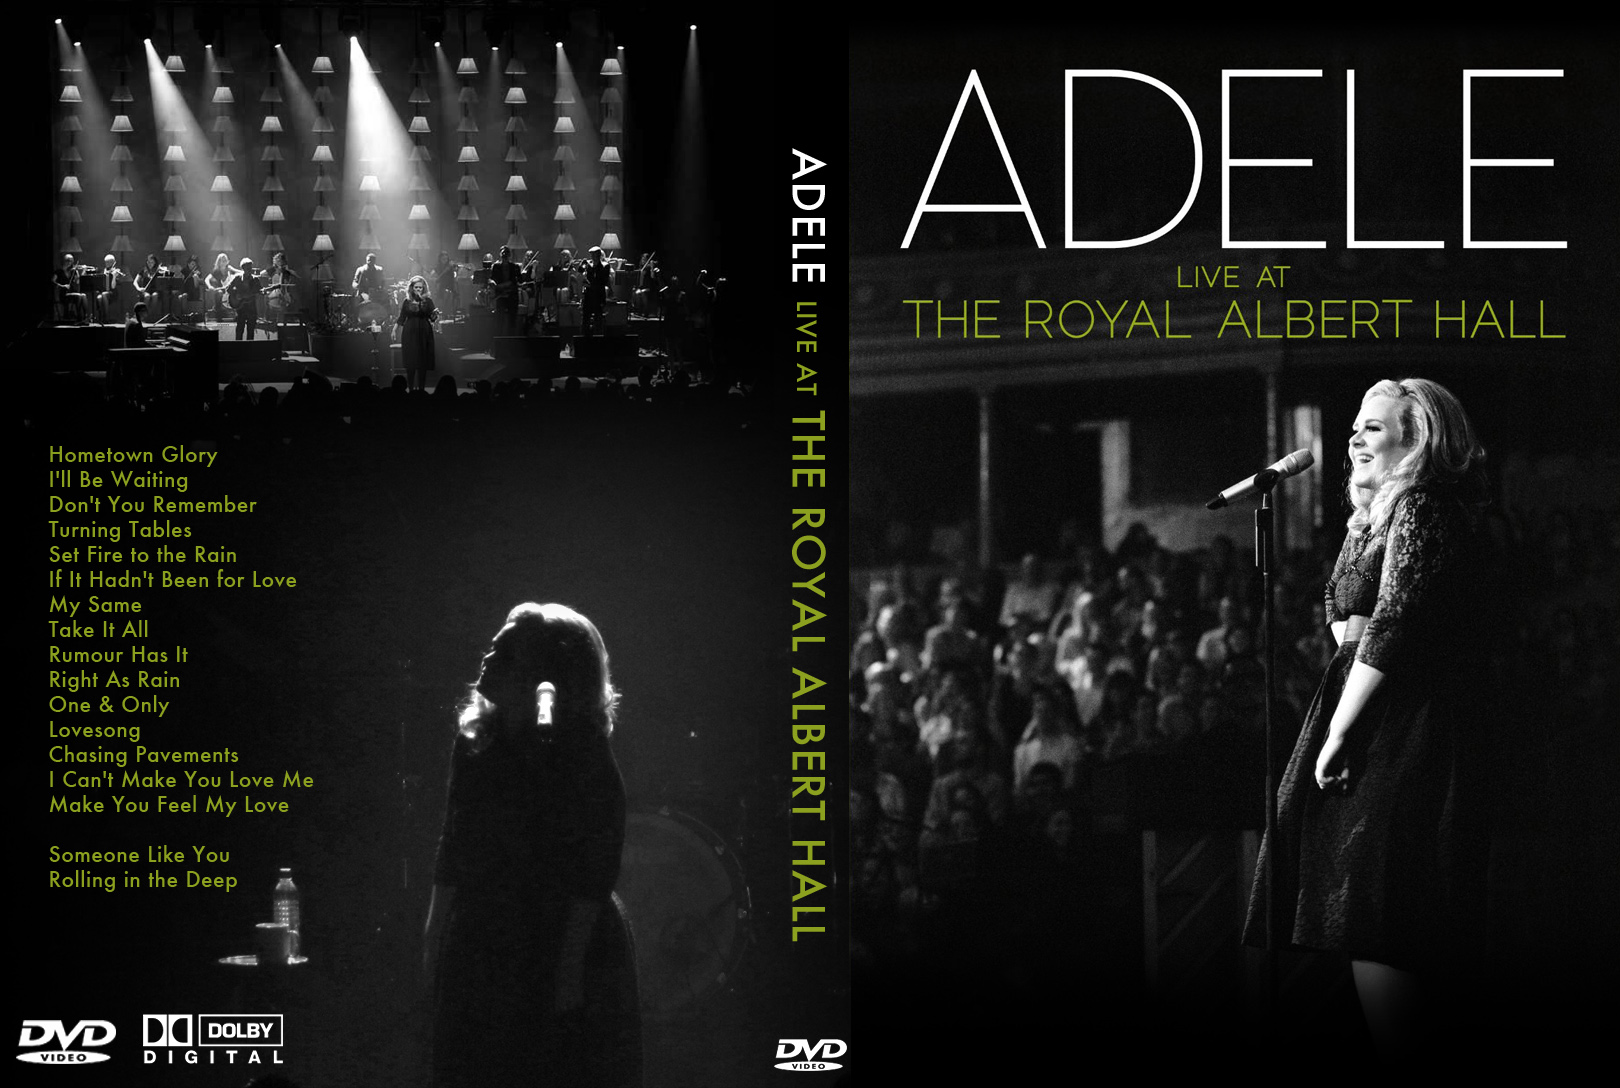 Jaquette DVD Adele live at the royal albert hall custom